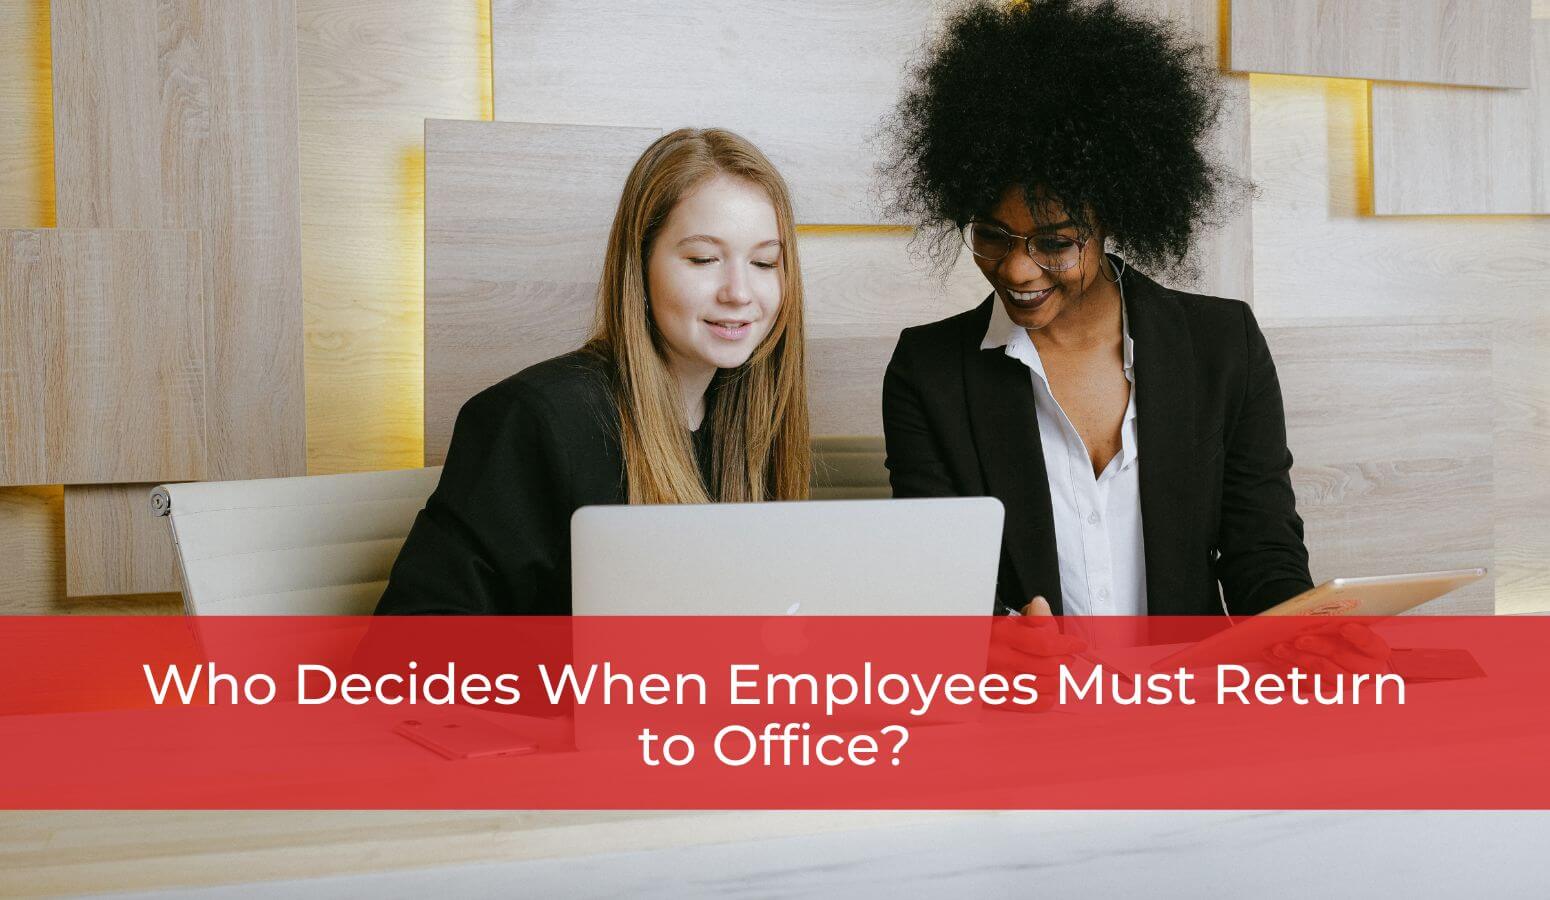 Featured image for “Who Decides When Employees Must Return to Office?”